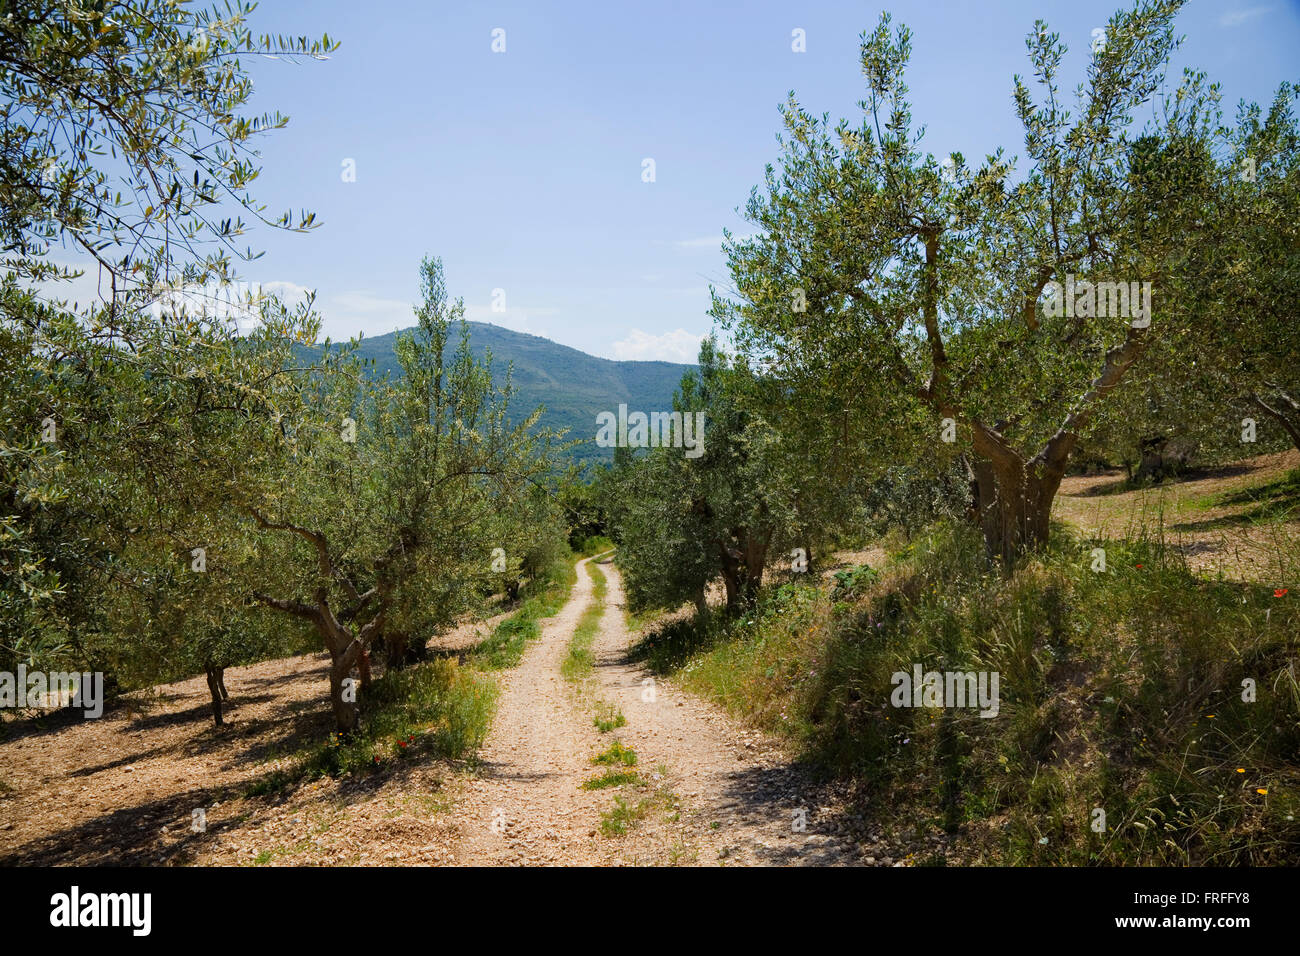 view of olive trees in an olive grove Stock Photo